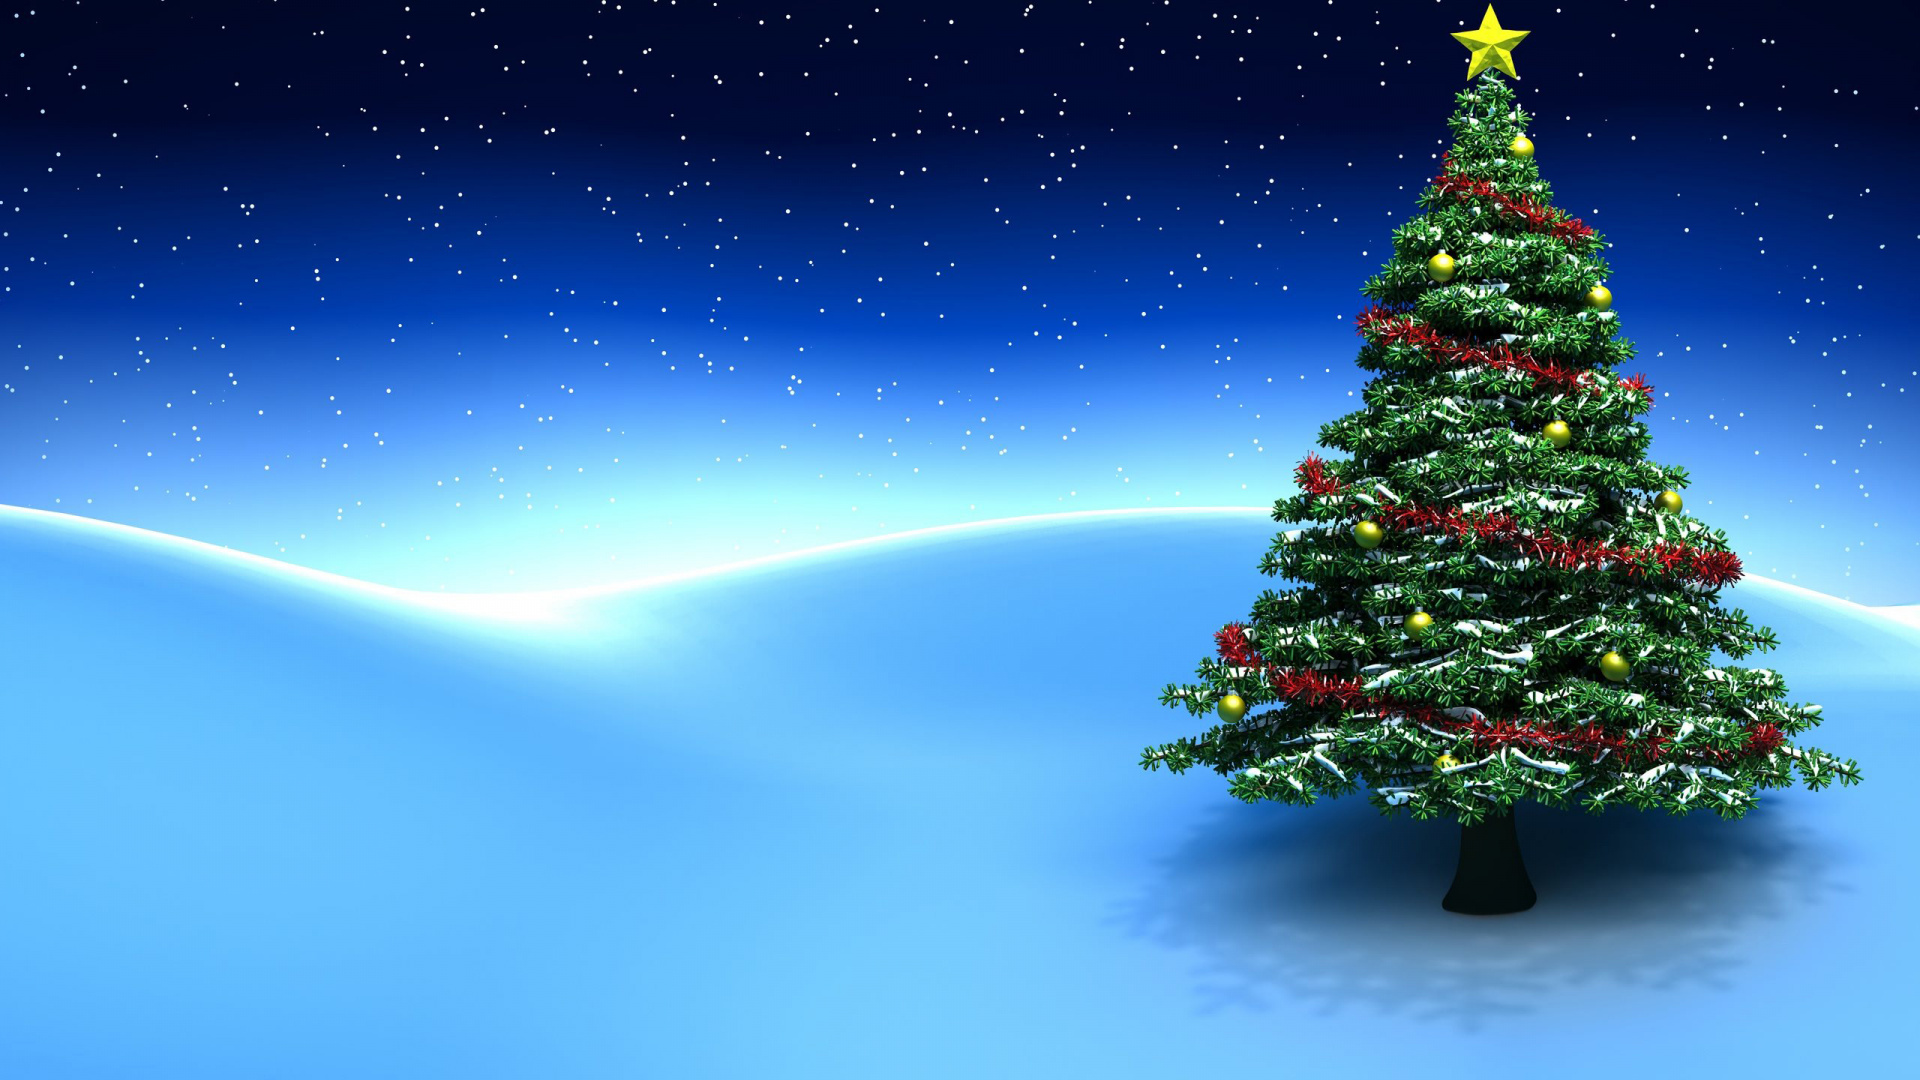 New Year, Christmas Day, Christmas Tree, Tree, Christmas. Wallpaper in 1920x1080 Resolution